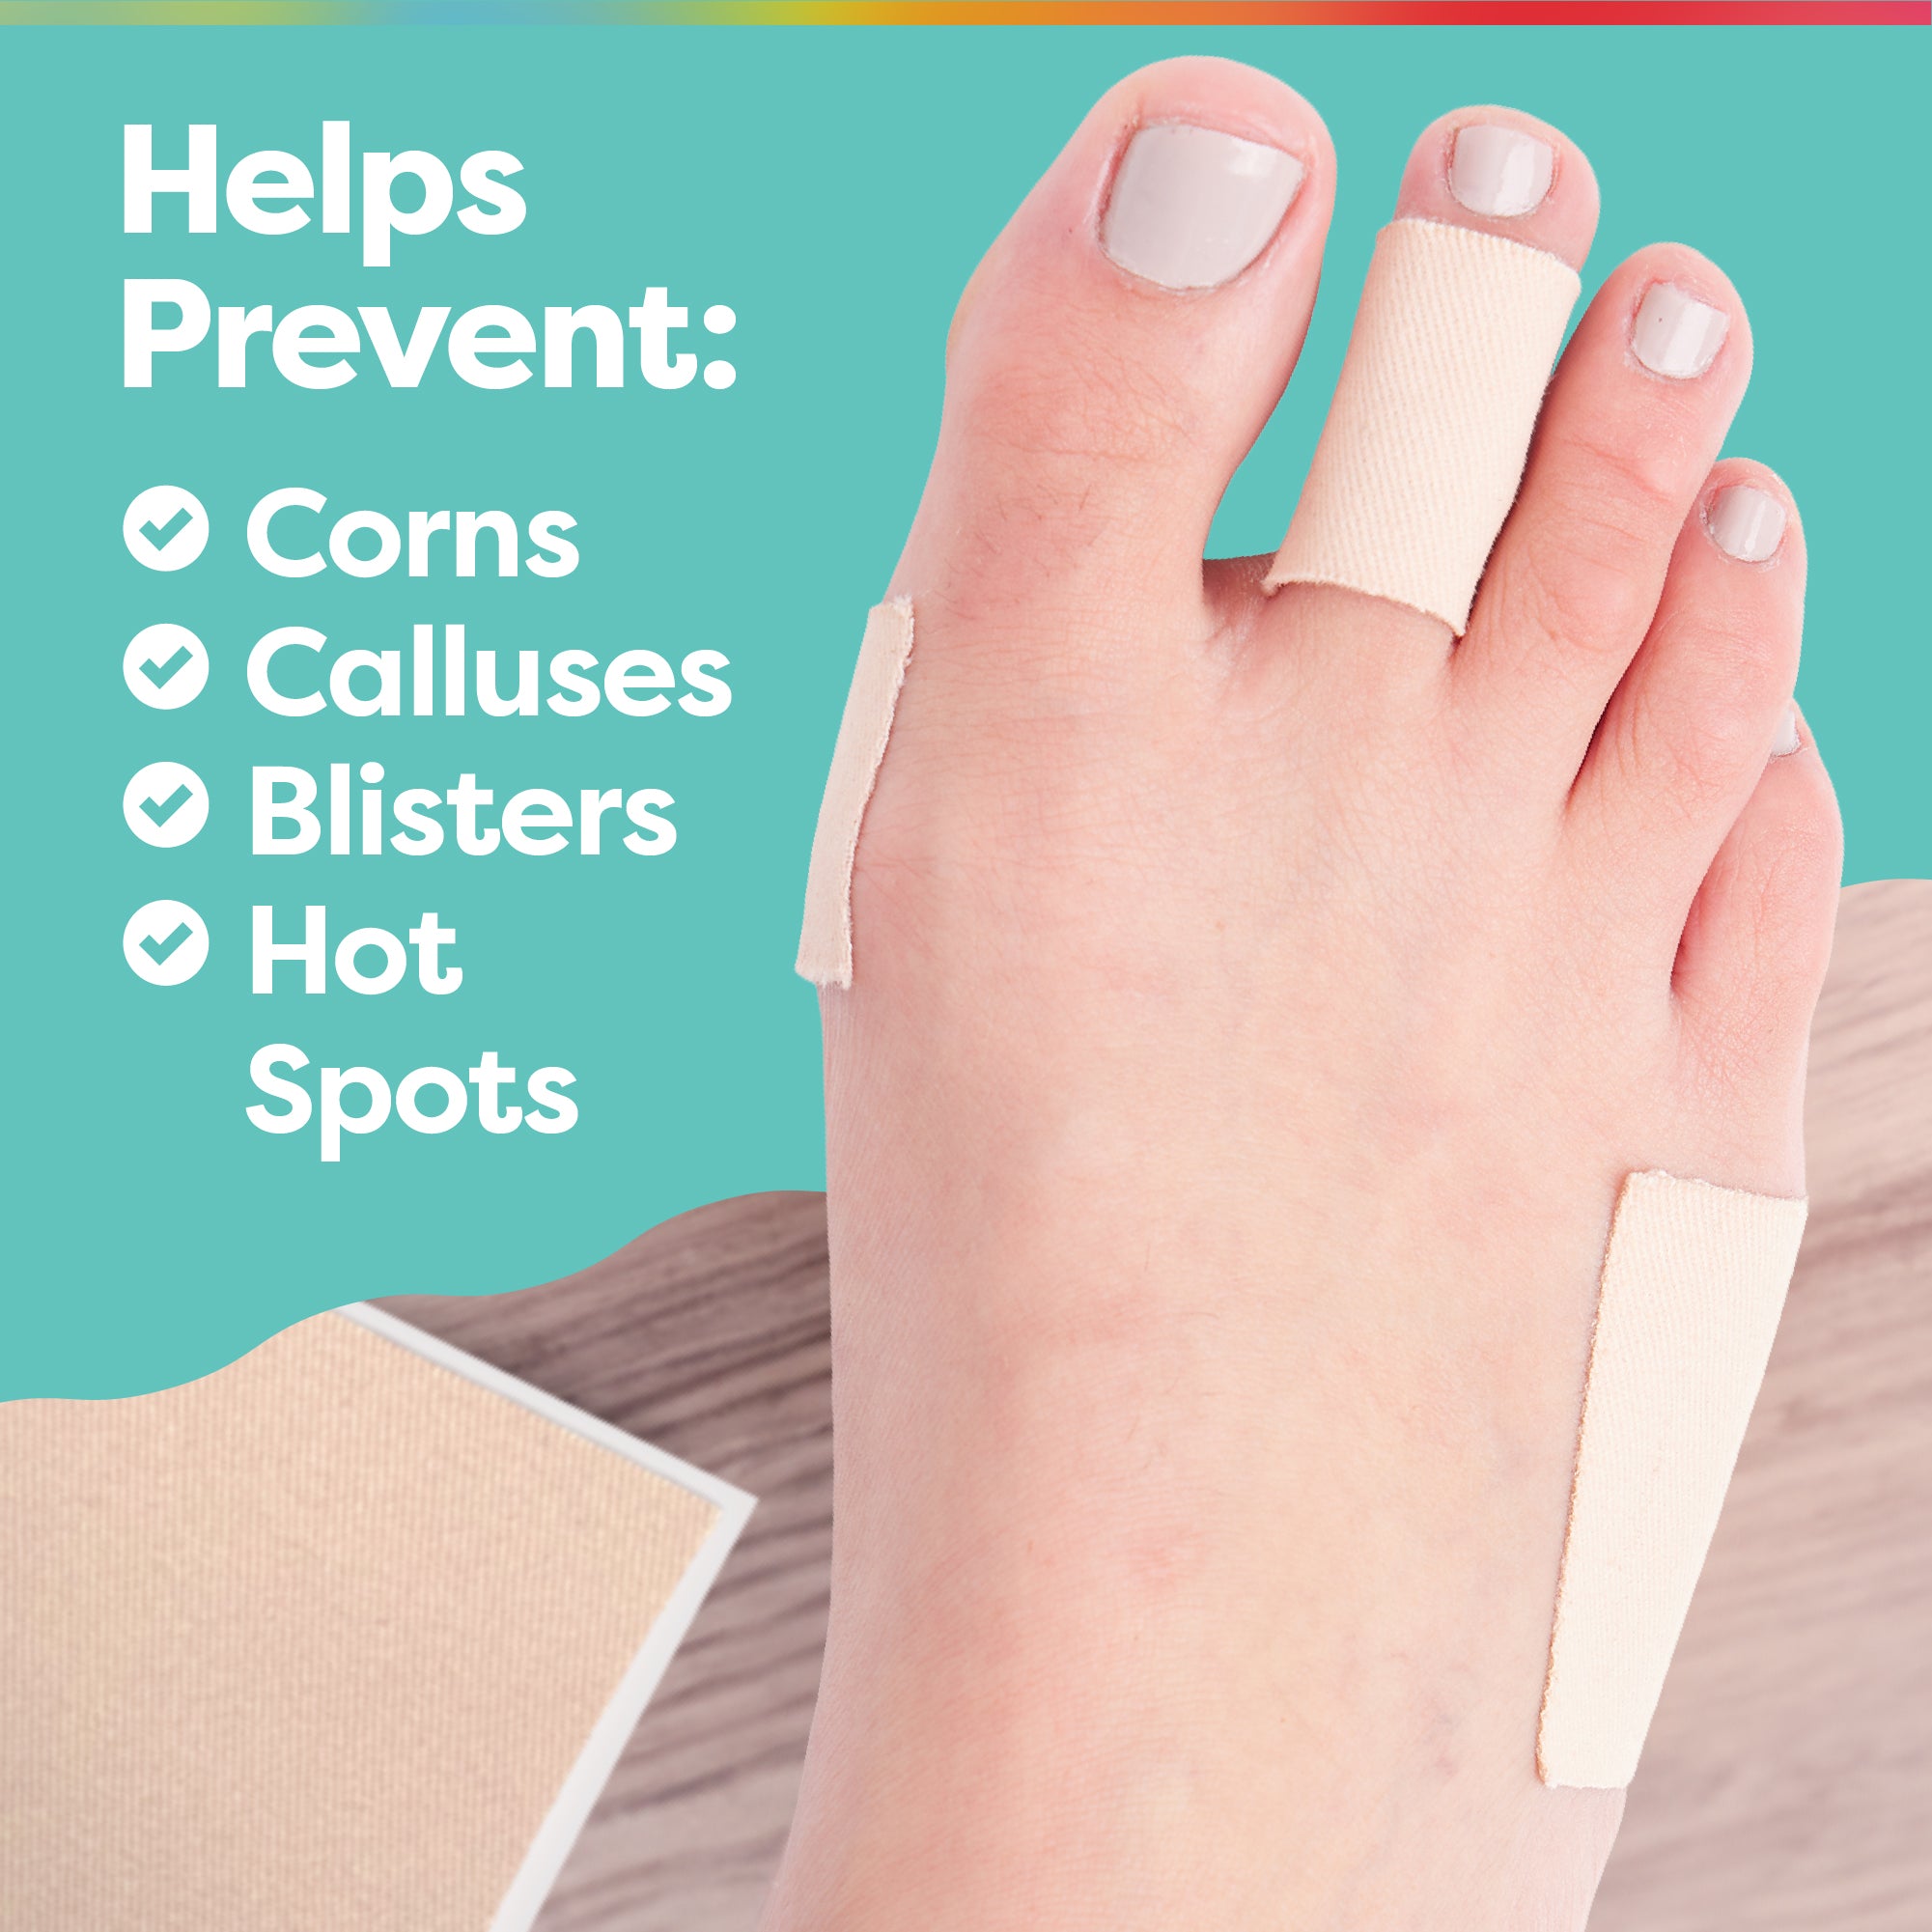 Buy Blister Tape for Heels, IKOCO Sticker for Blister Waterproof Blister  Roll, Anti-Slip Moleskin Tape Foot Care Sticker to Prevent Toe Blister and  Chafing Online at Low Prices in India - Amazon.in